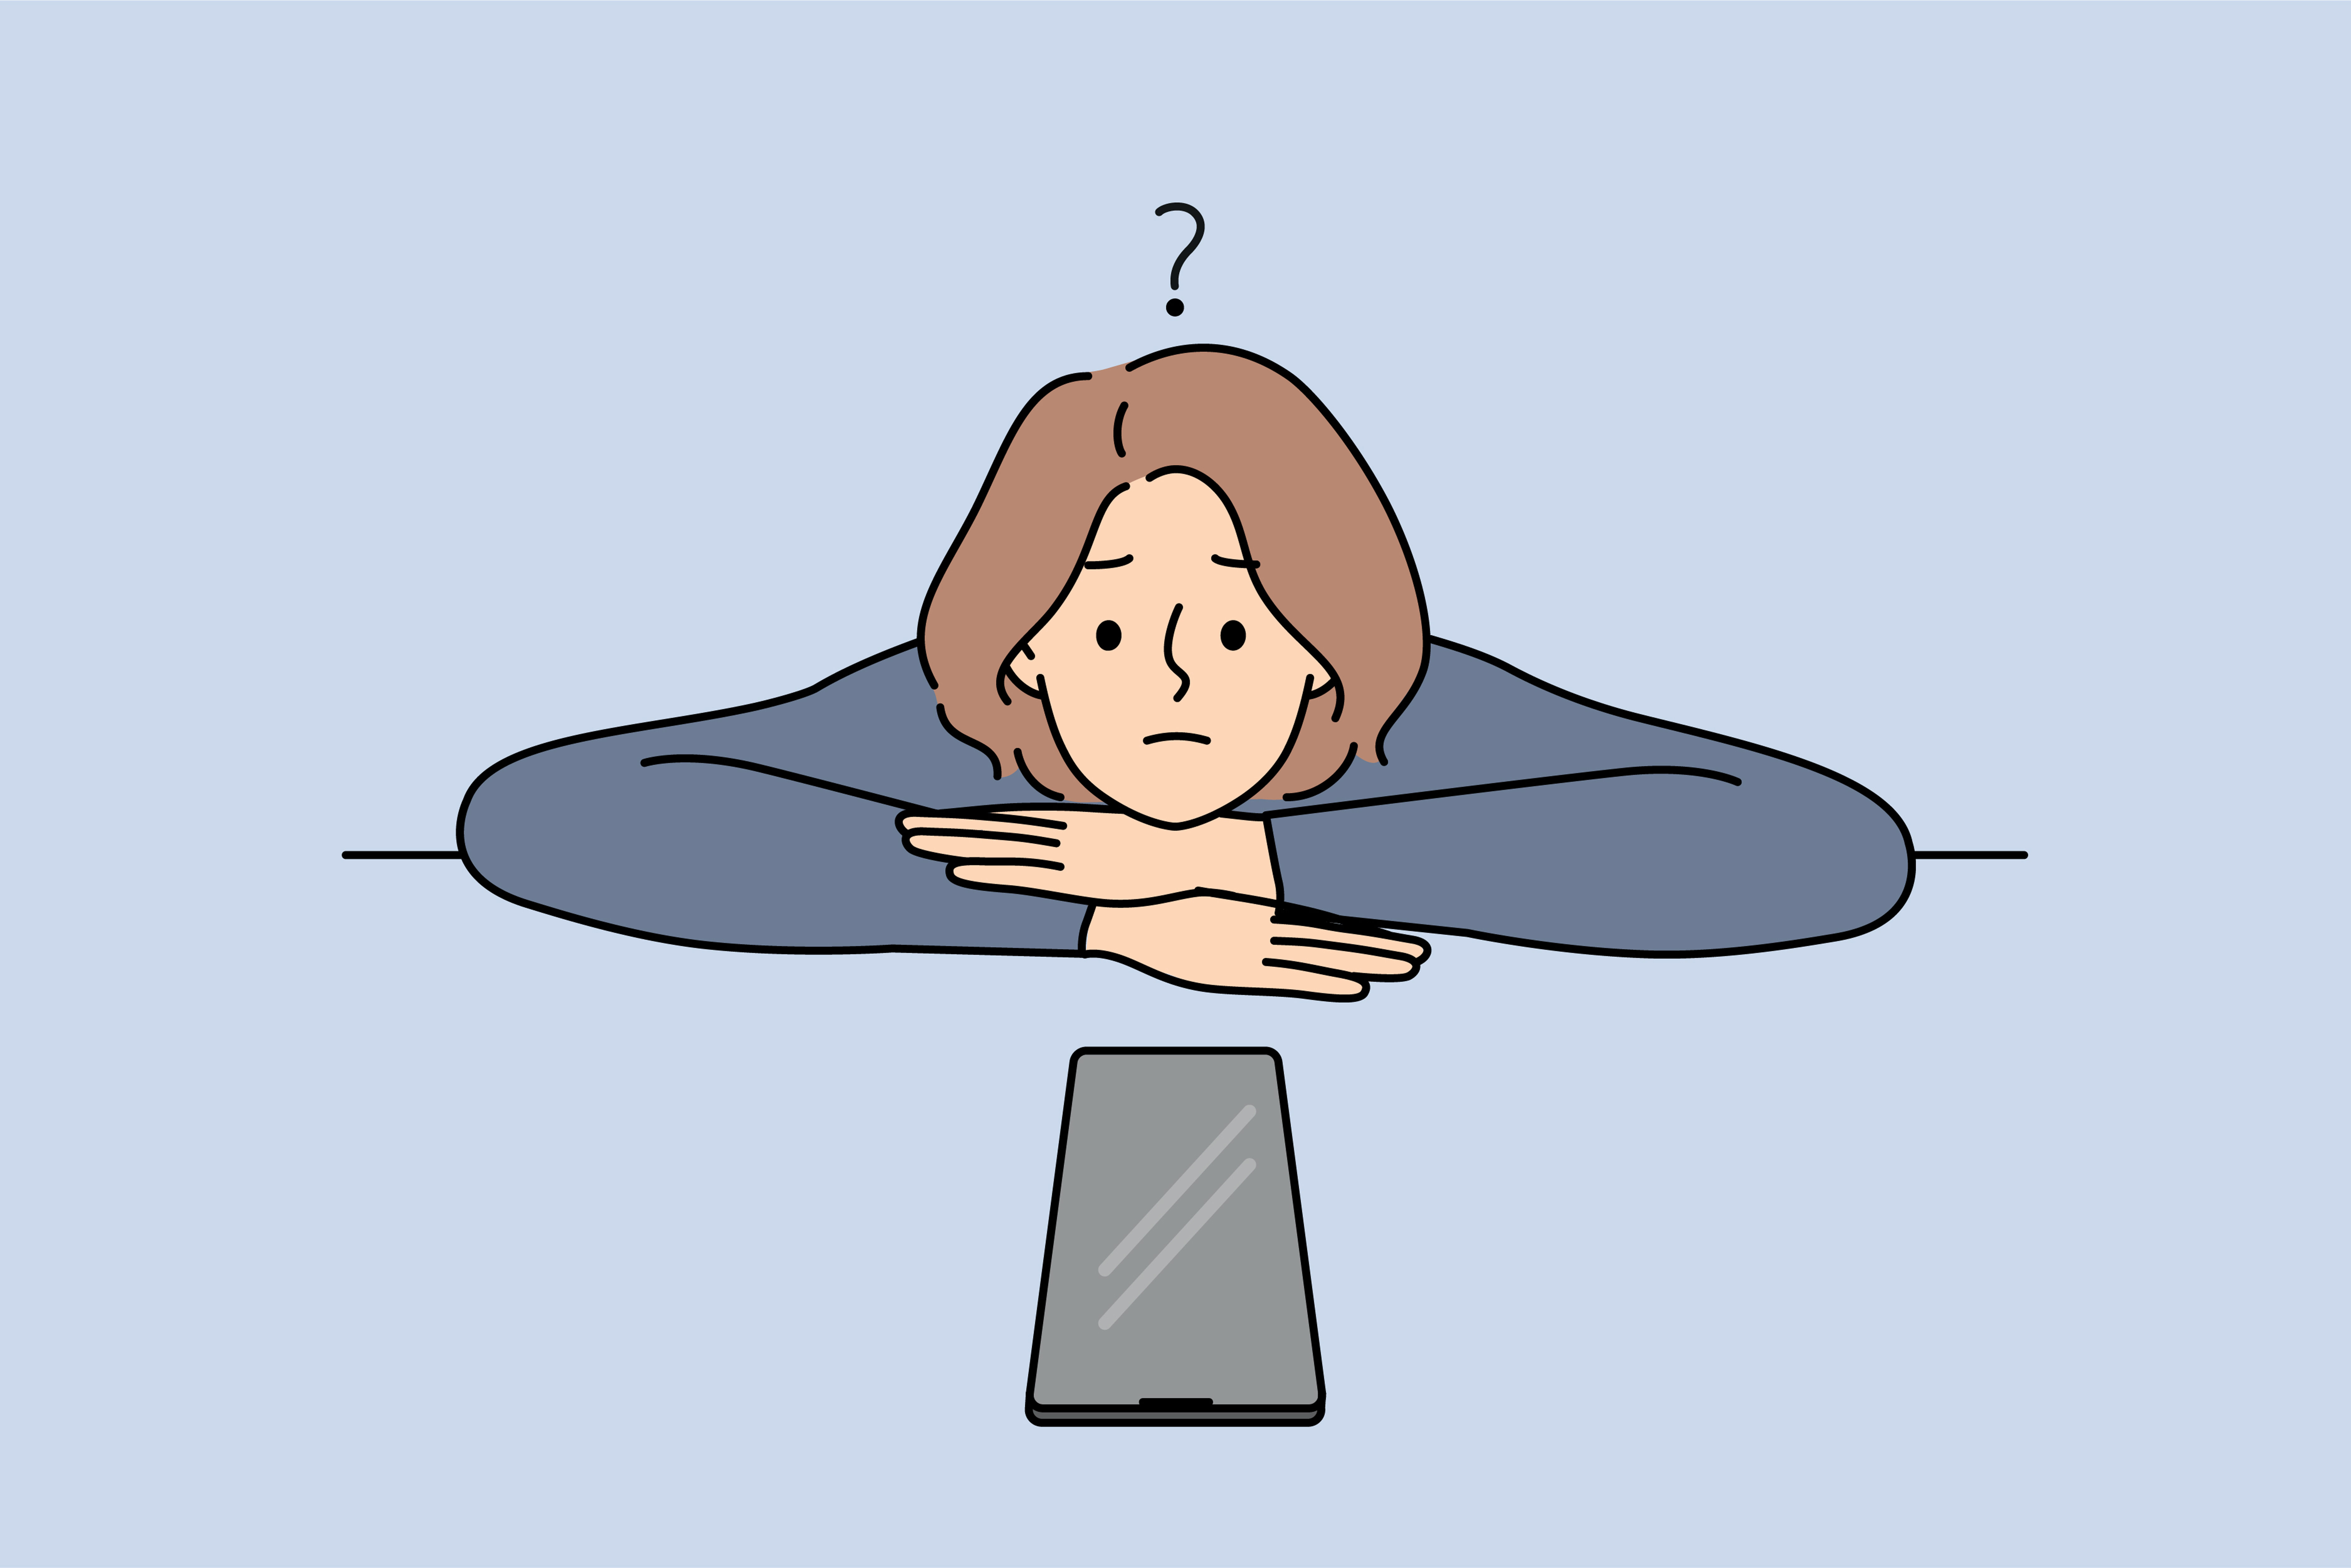 An illustration of a young woman with her head on her creased arms looking at a blank phone lying on the table in front of her. There is a question mark over her head.